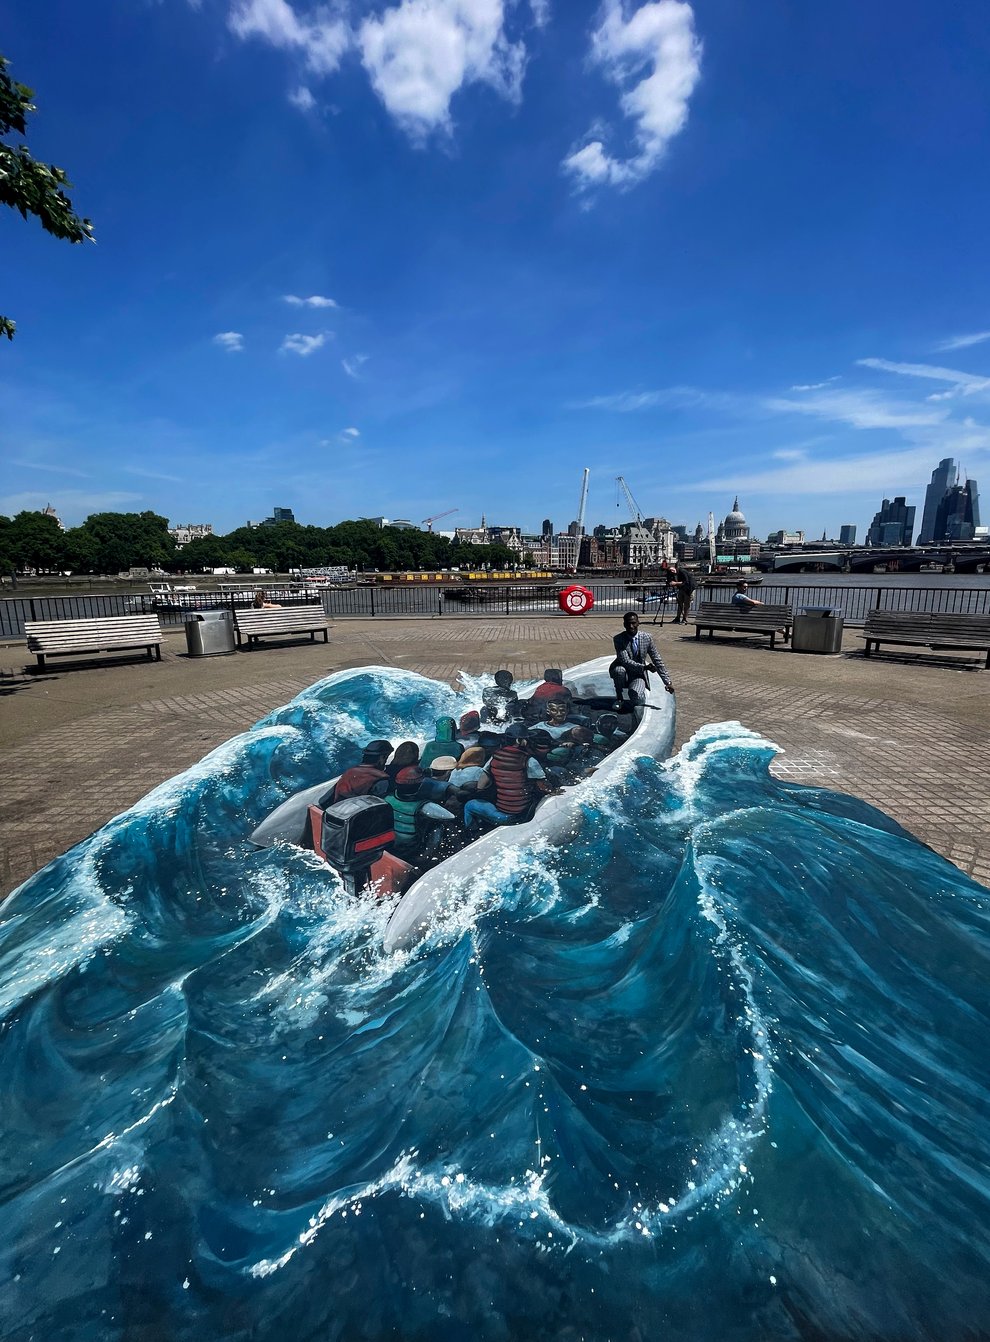 Three immersive artworks have been unveiled on London’s Southbank, depicting Ethiopian refugee Eskander Turki’s journey to safety in the UK (Migrant Help/PA)